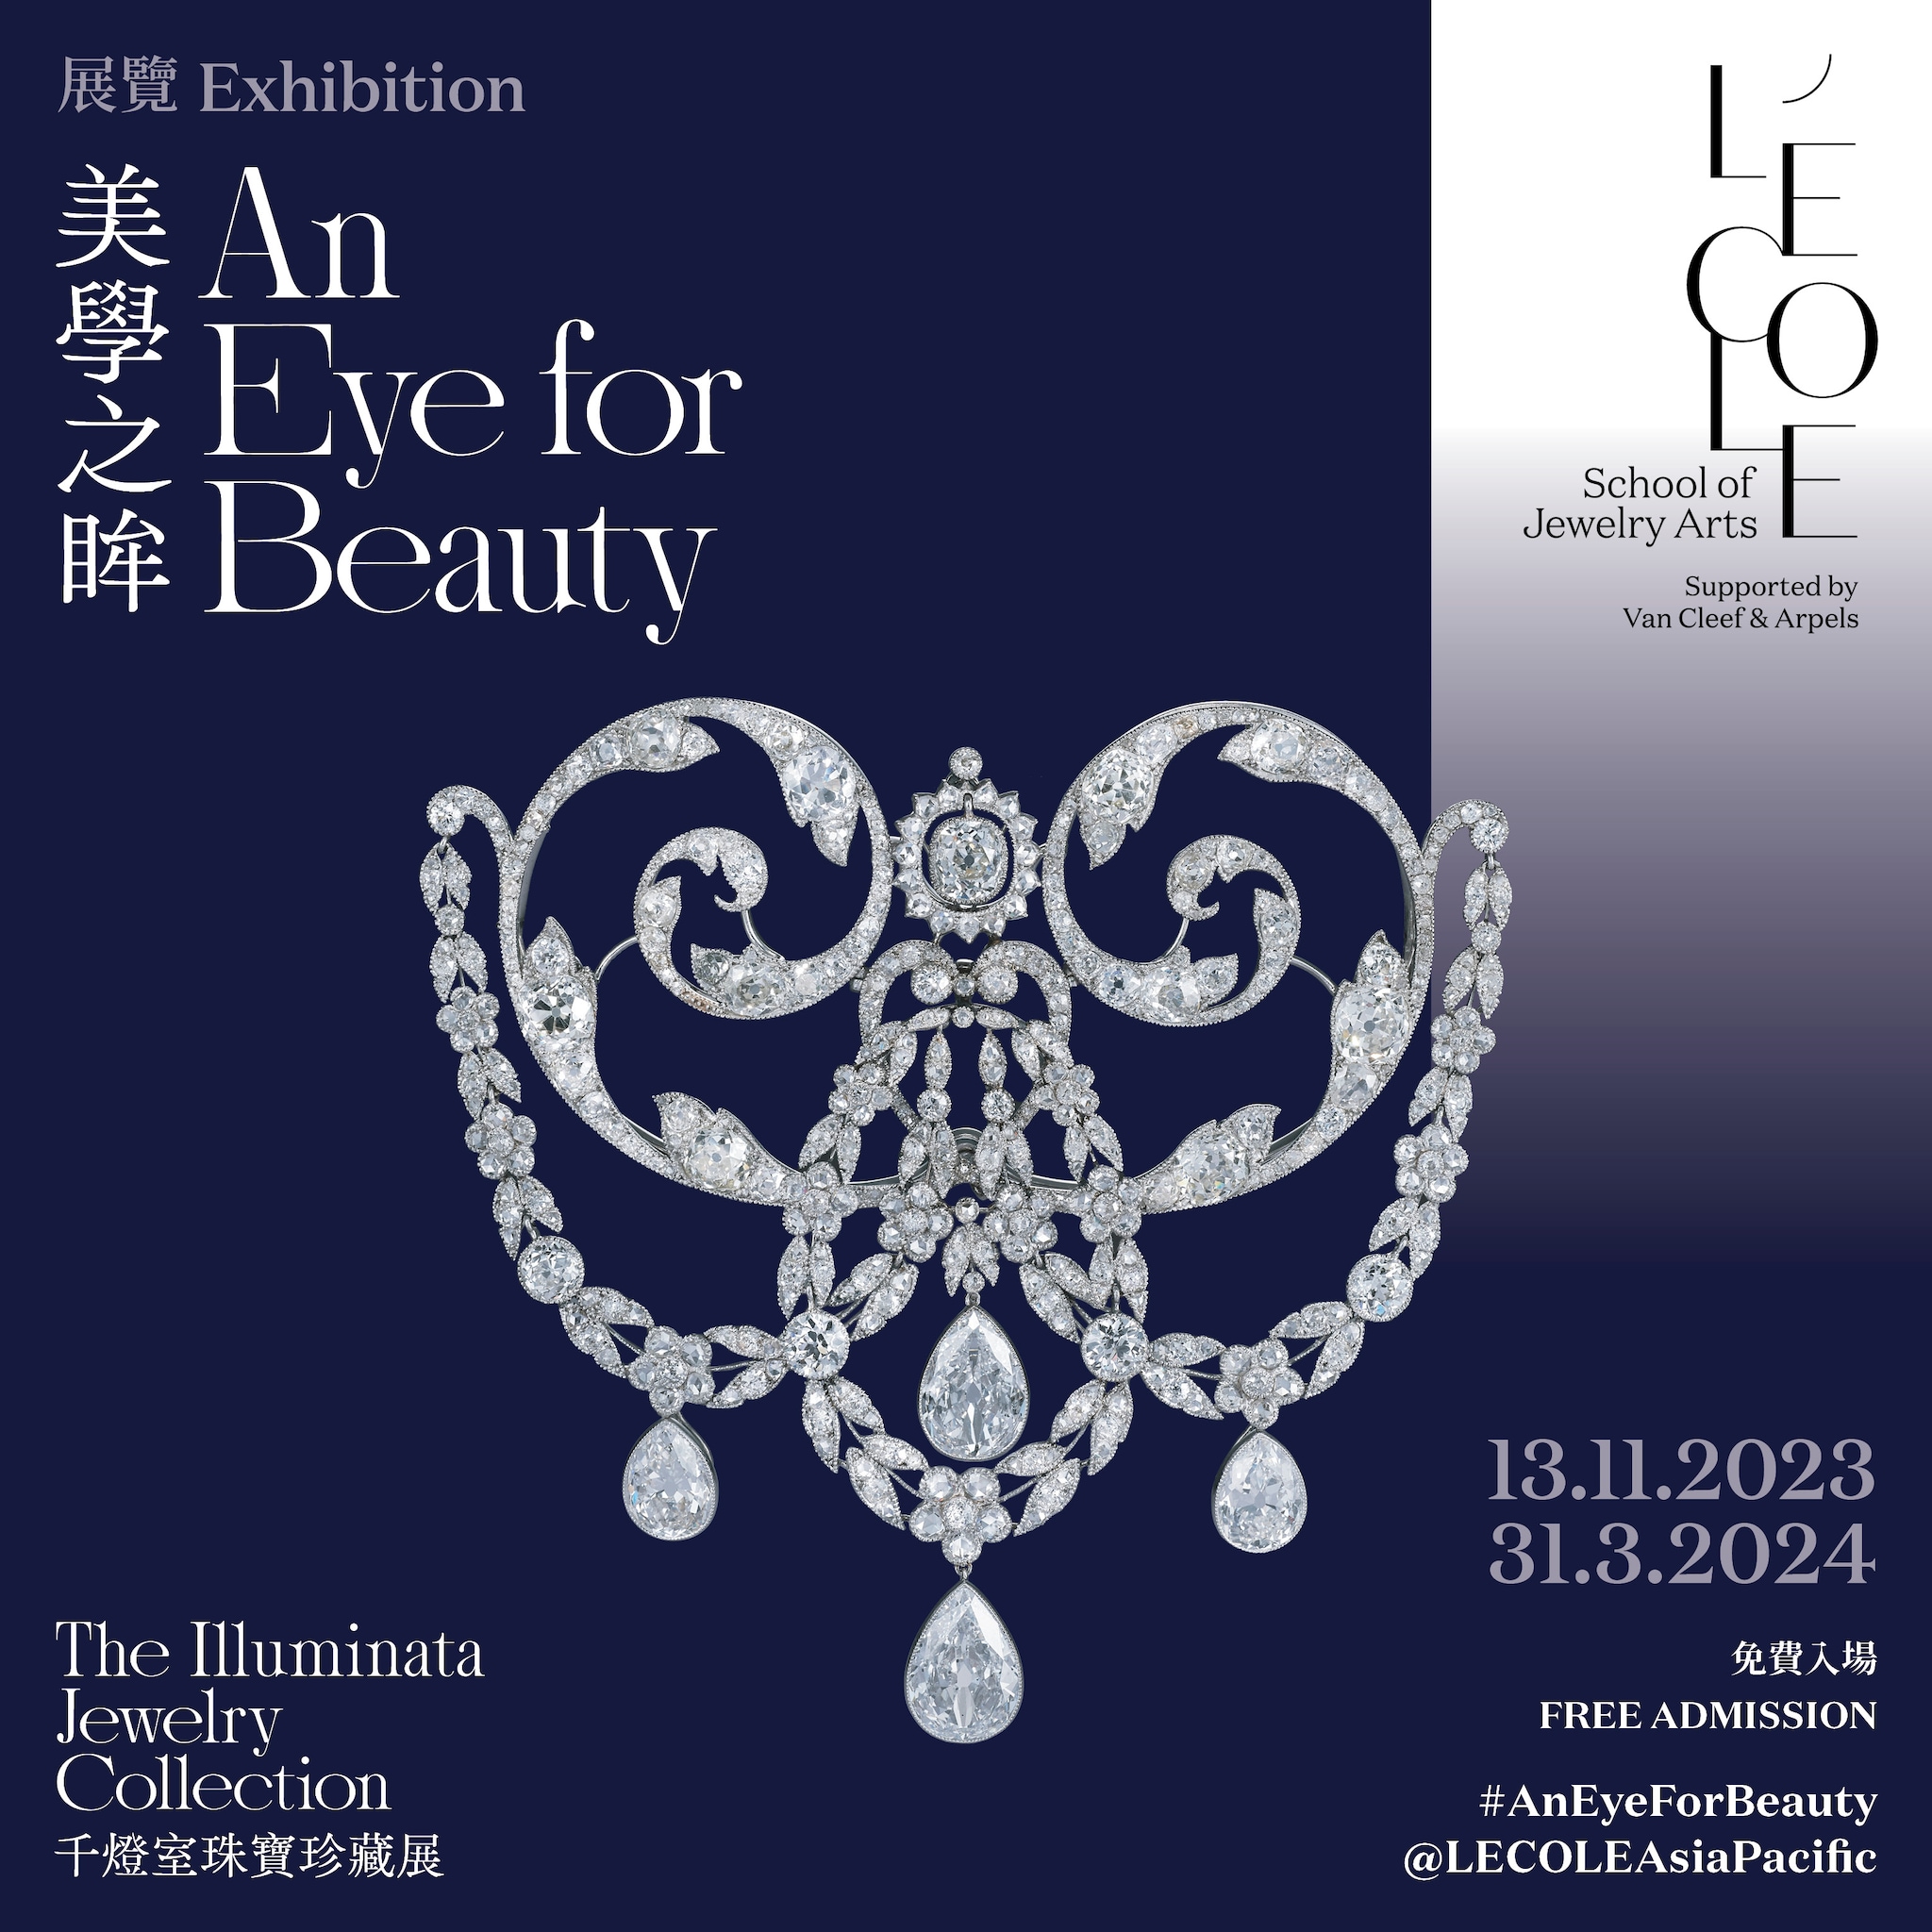 "An Eye for Beauty, The Illuminata Jewelry Collection" Exhibition, L'ECOLE, School of Jewelry Arts, K11 MUSEA, Hong Kong